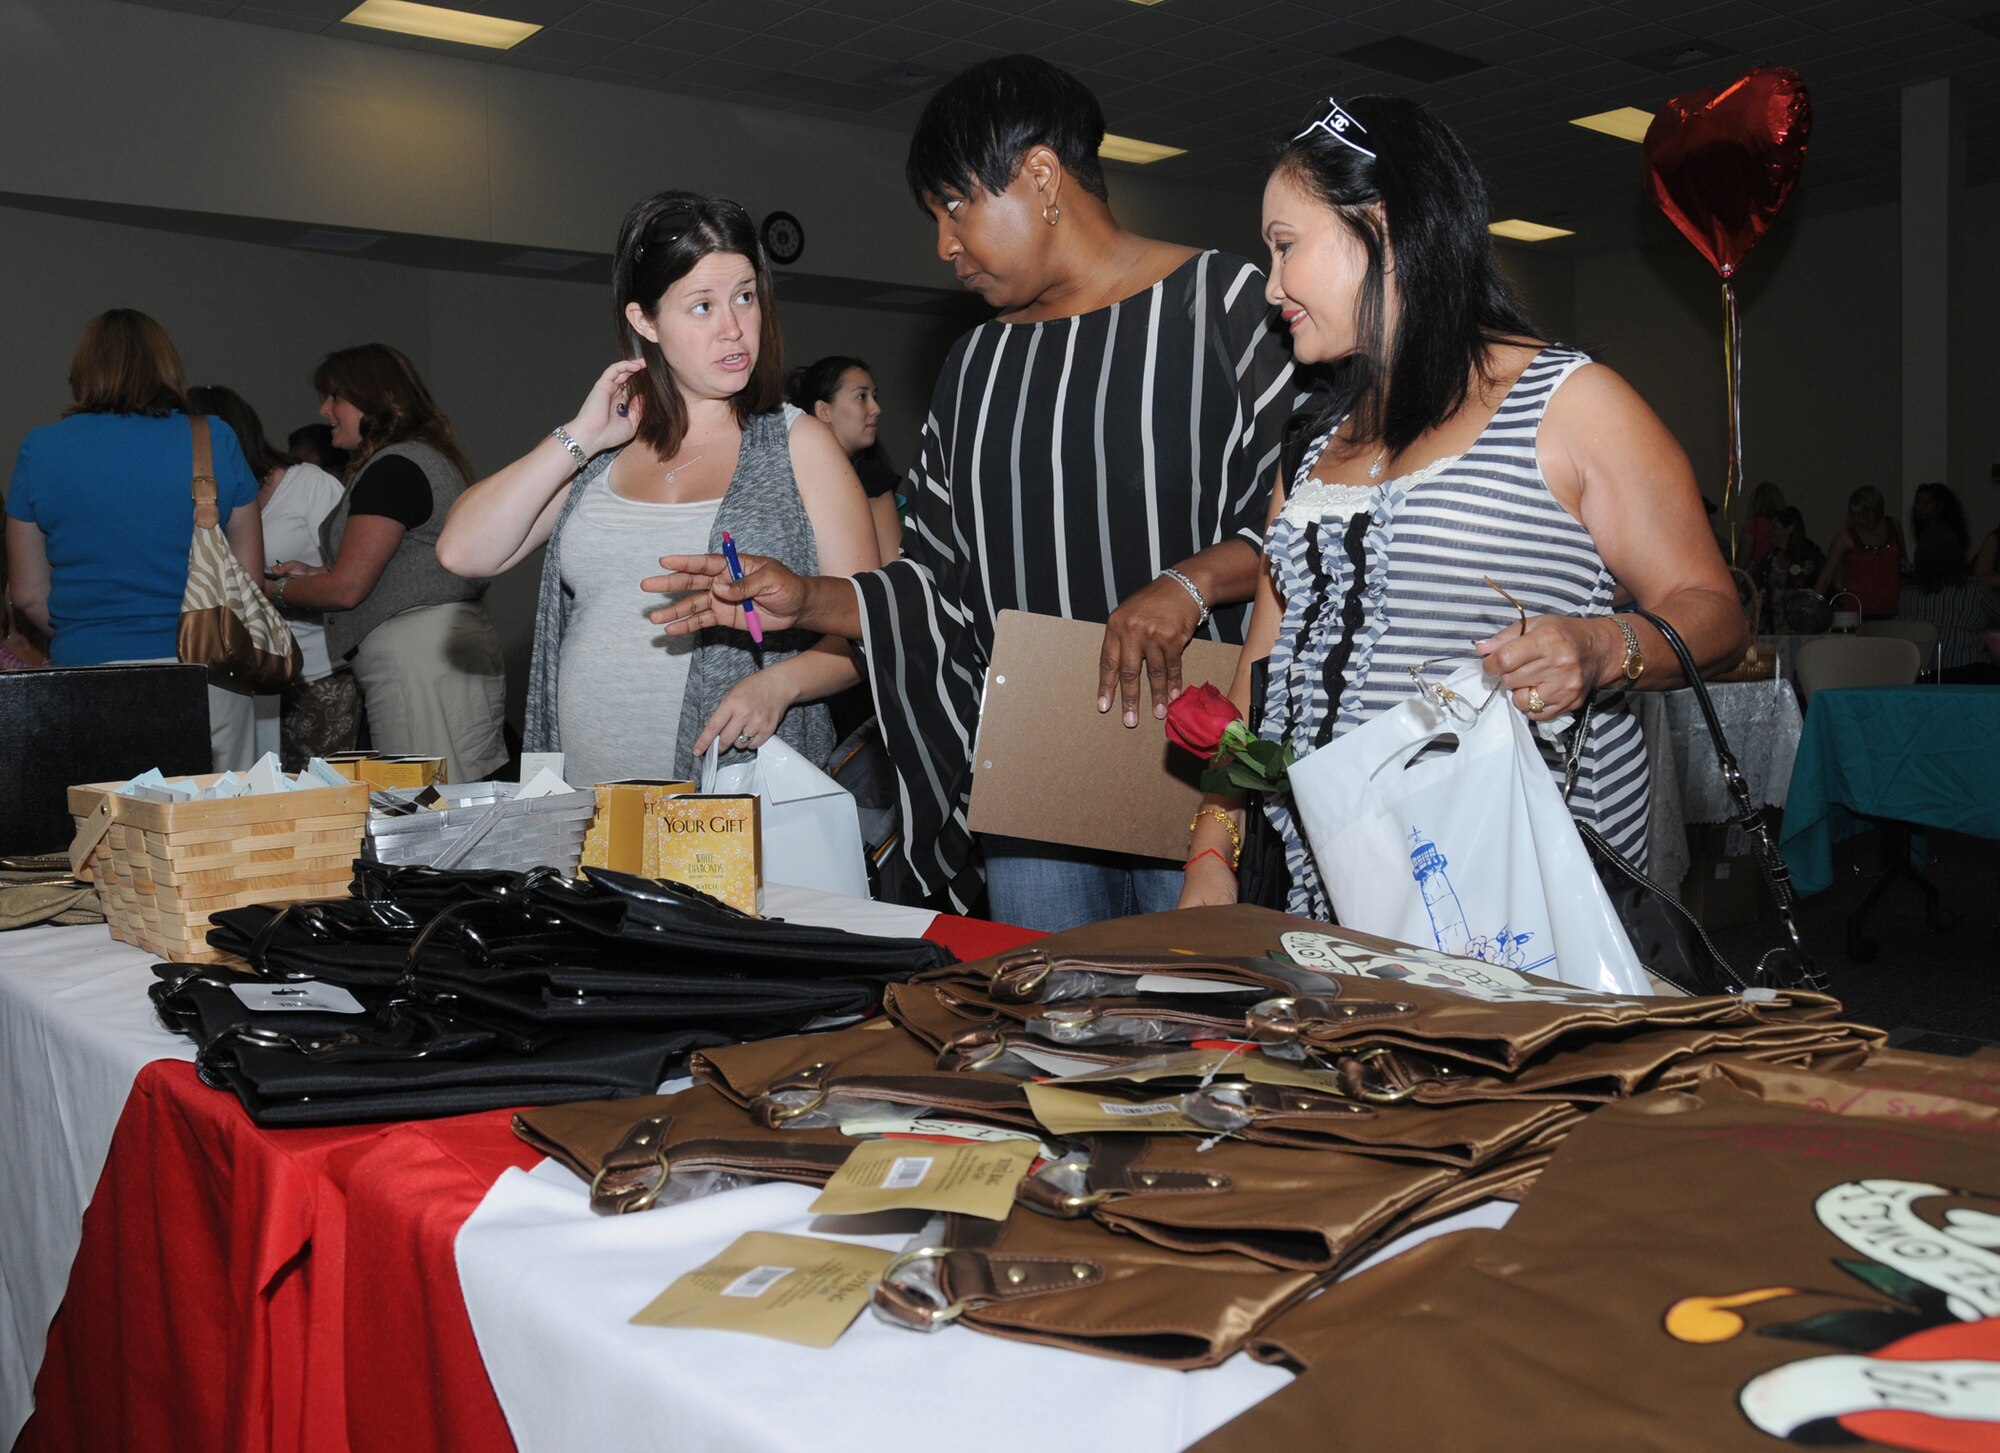 From left, Nicole Brooks, Pamela Walker and Ofelia Kozuma check out a display of products from the base exchange during Friday's Pamper Me Day at the Roberts Consolidated Aircraft Maintenance Facility.  Mrs. Brooks is married to Airman Jonathan Brooks, a student in the 338th Training Squadron; Ms. Walker is softline manager at the exchange; and Mrs. Kozuma is married to Carl Kozuma, a retired Sailor from Gulfport.  Pamper Me Day is an annual observance sponsored by the airman and family readiness center that coincides with Military Spouse Appreciation Day. The event offered refreshments, door prizes, displays and services such as manicures, massages and facials.  (U.S. Air Force photo by Kemberly Groue